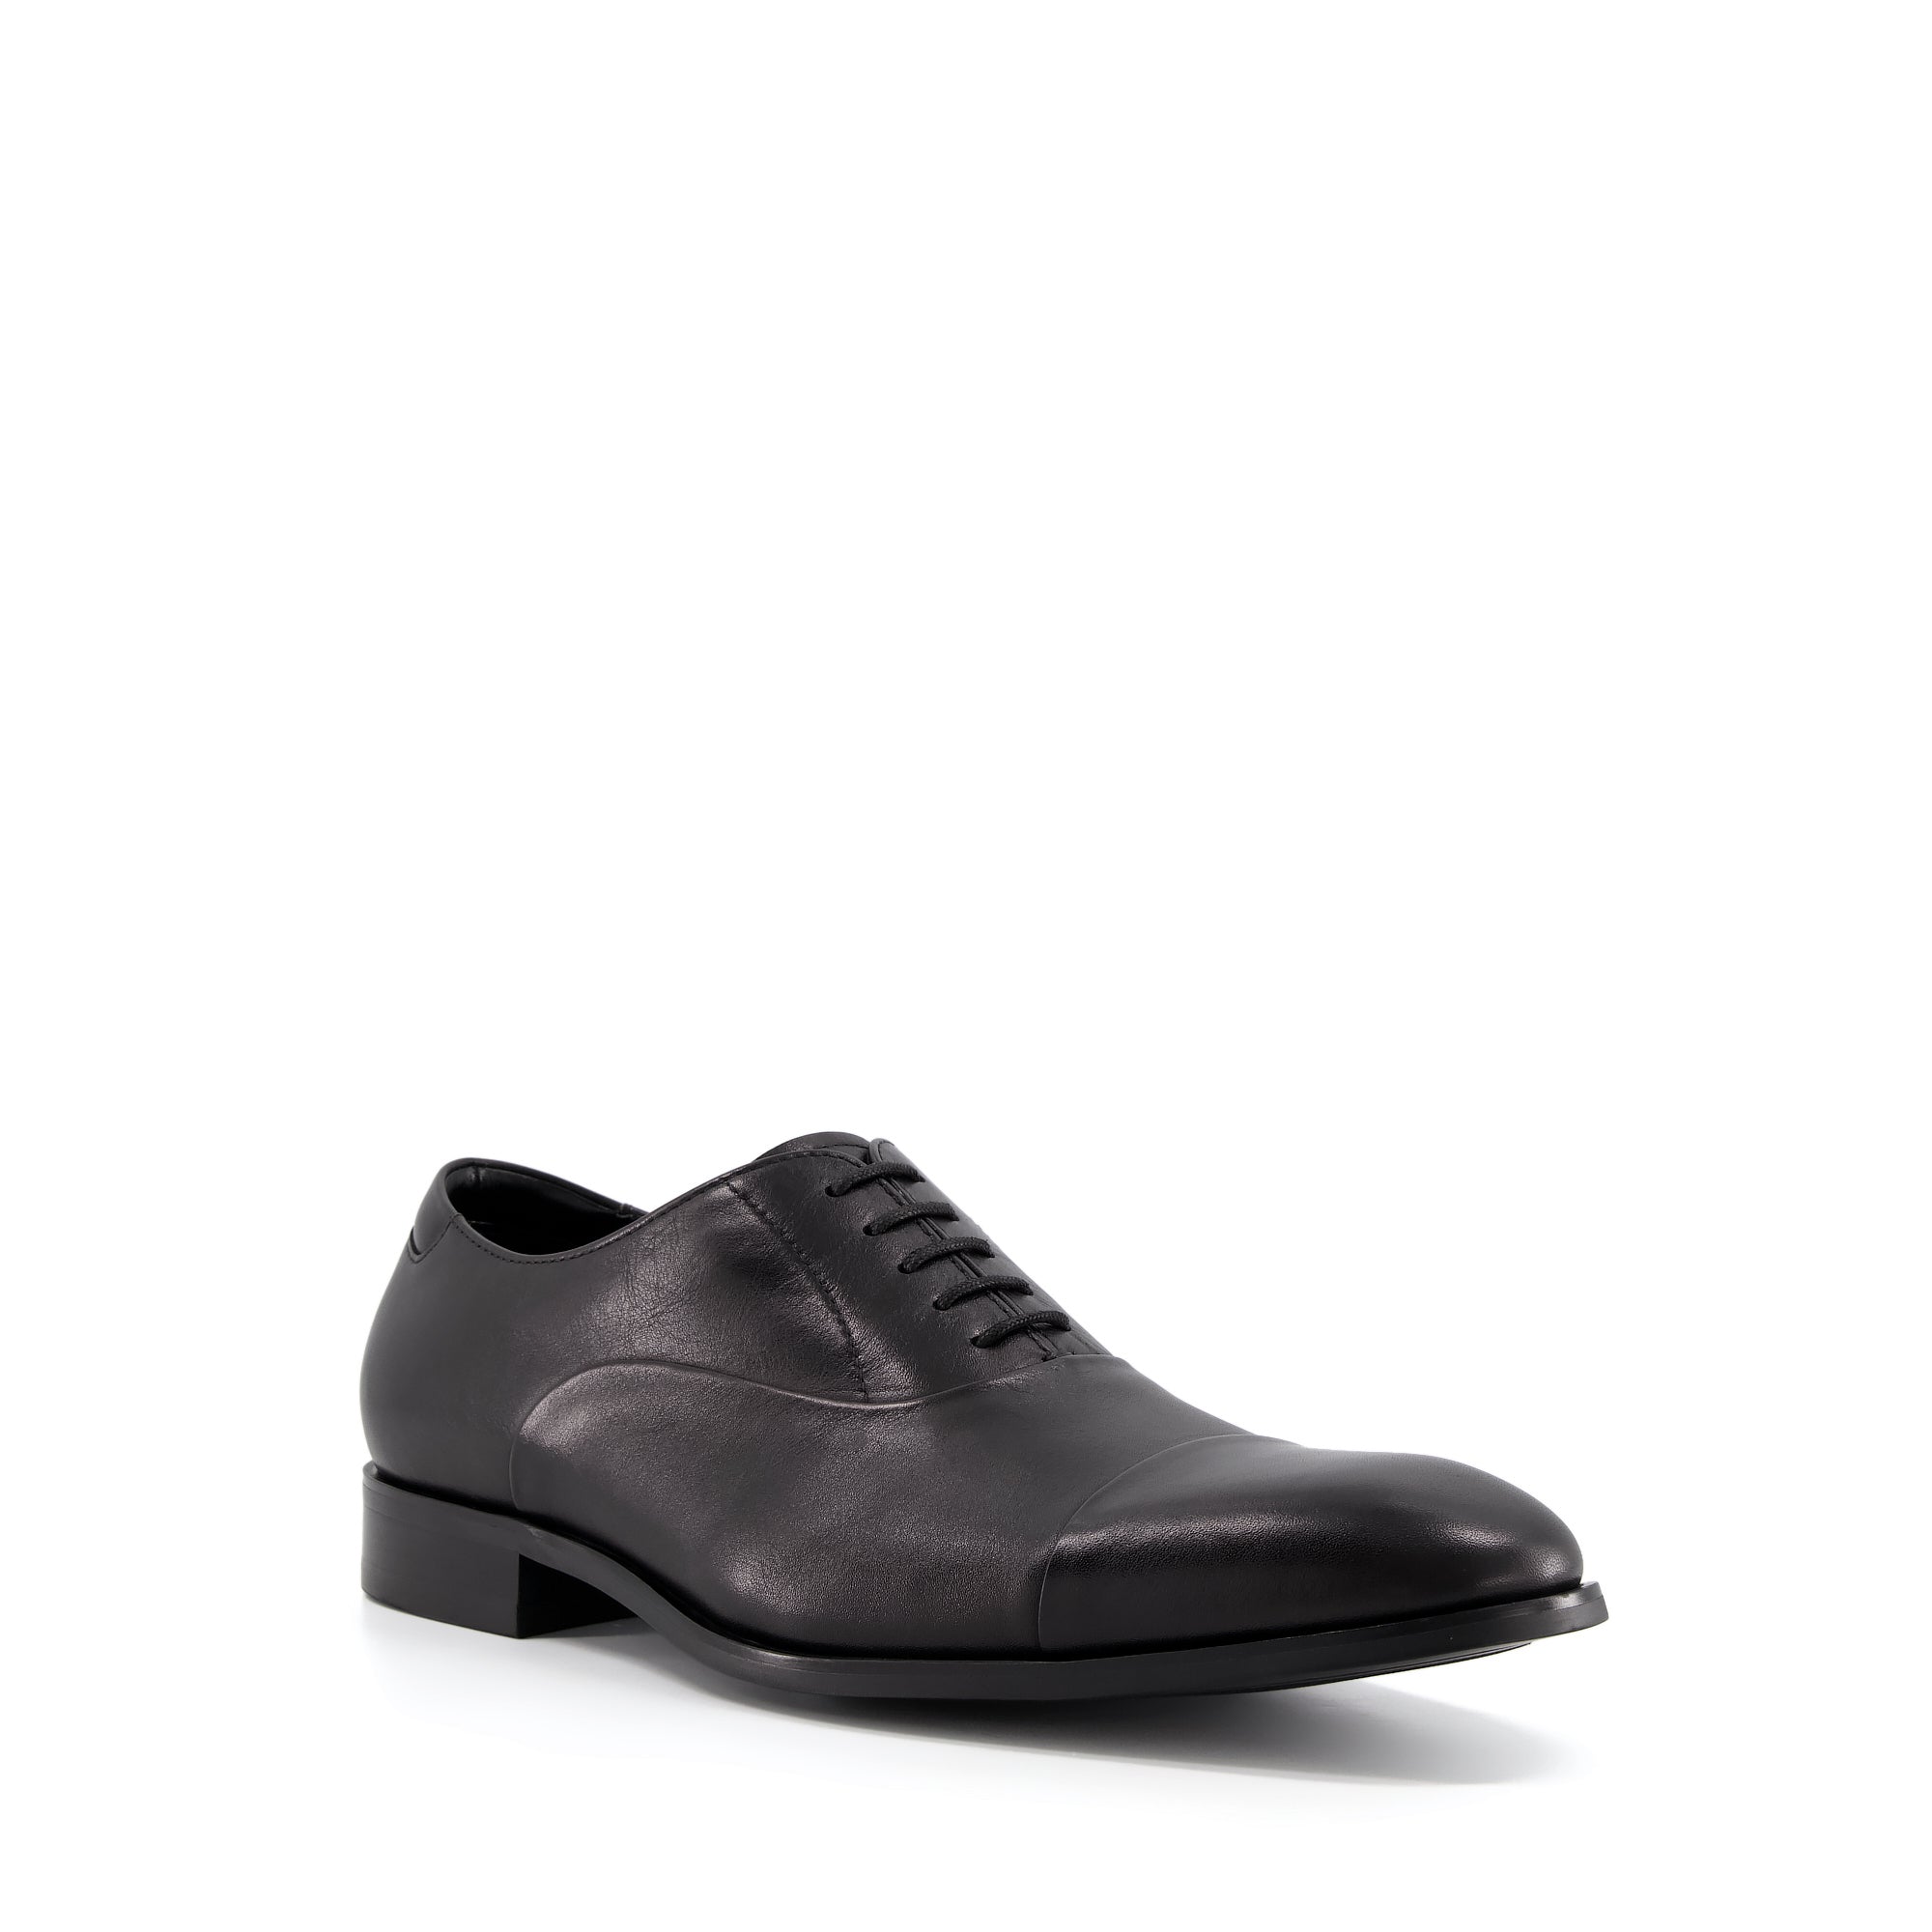 SECRECY - Lace-Up Oxford Shoes